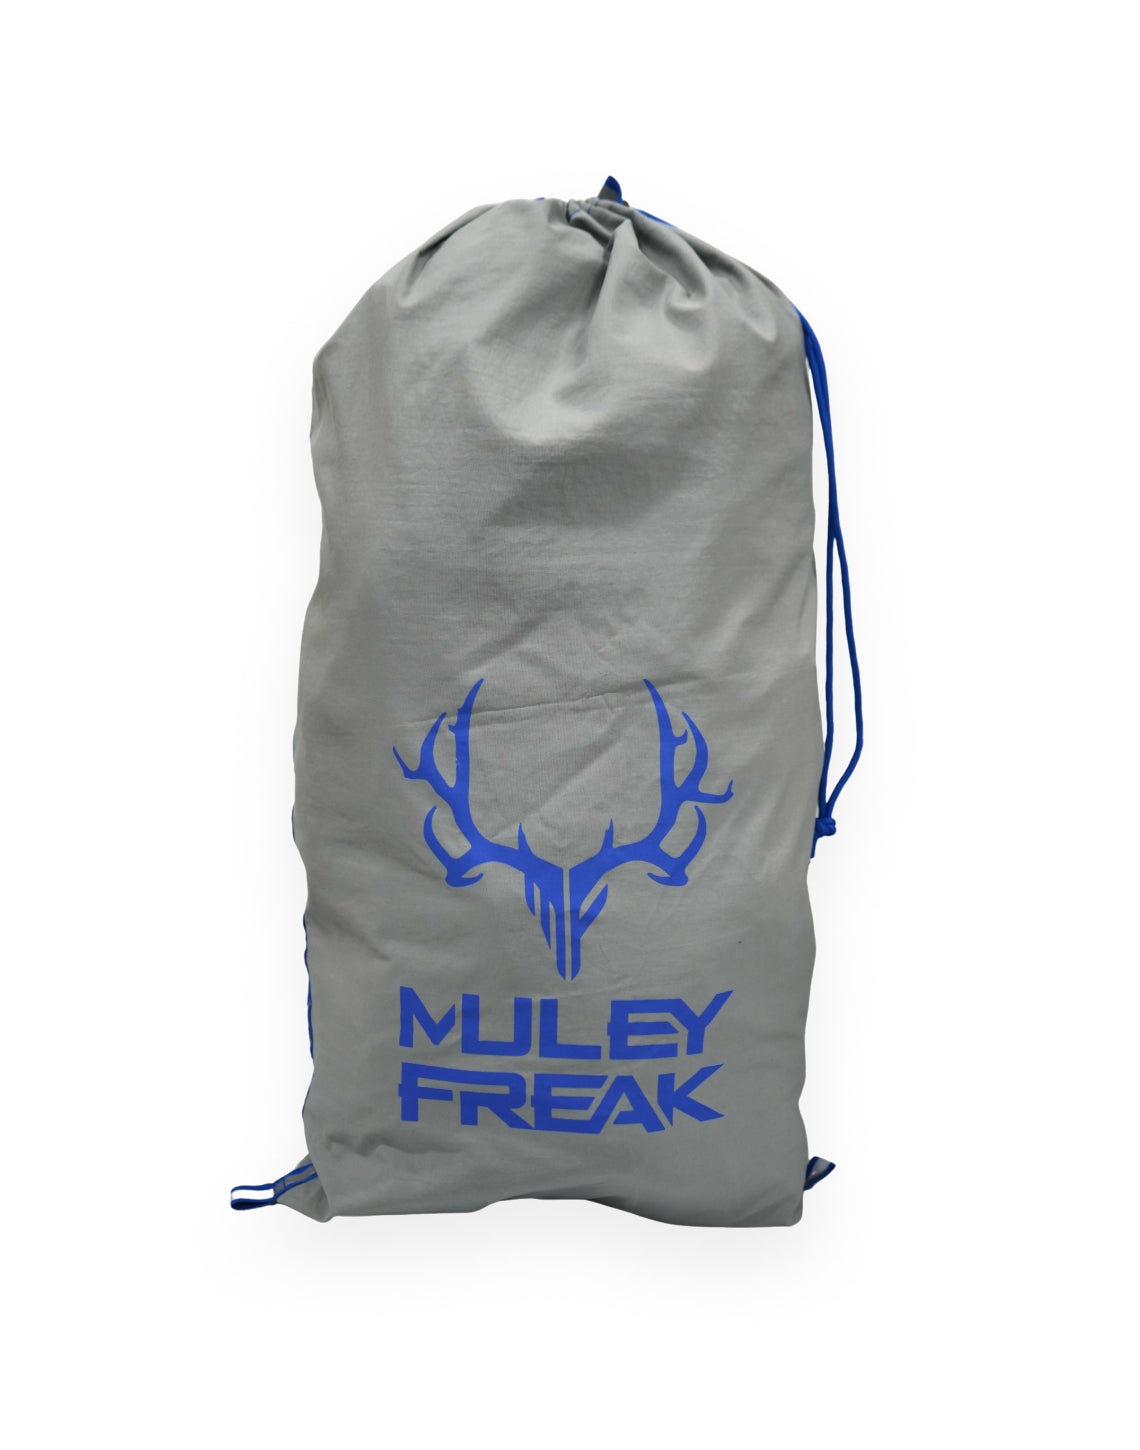 Muley Freak quarter game bag with secure cinch-top for hunters.